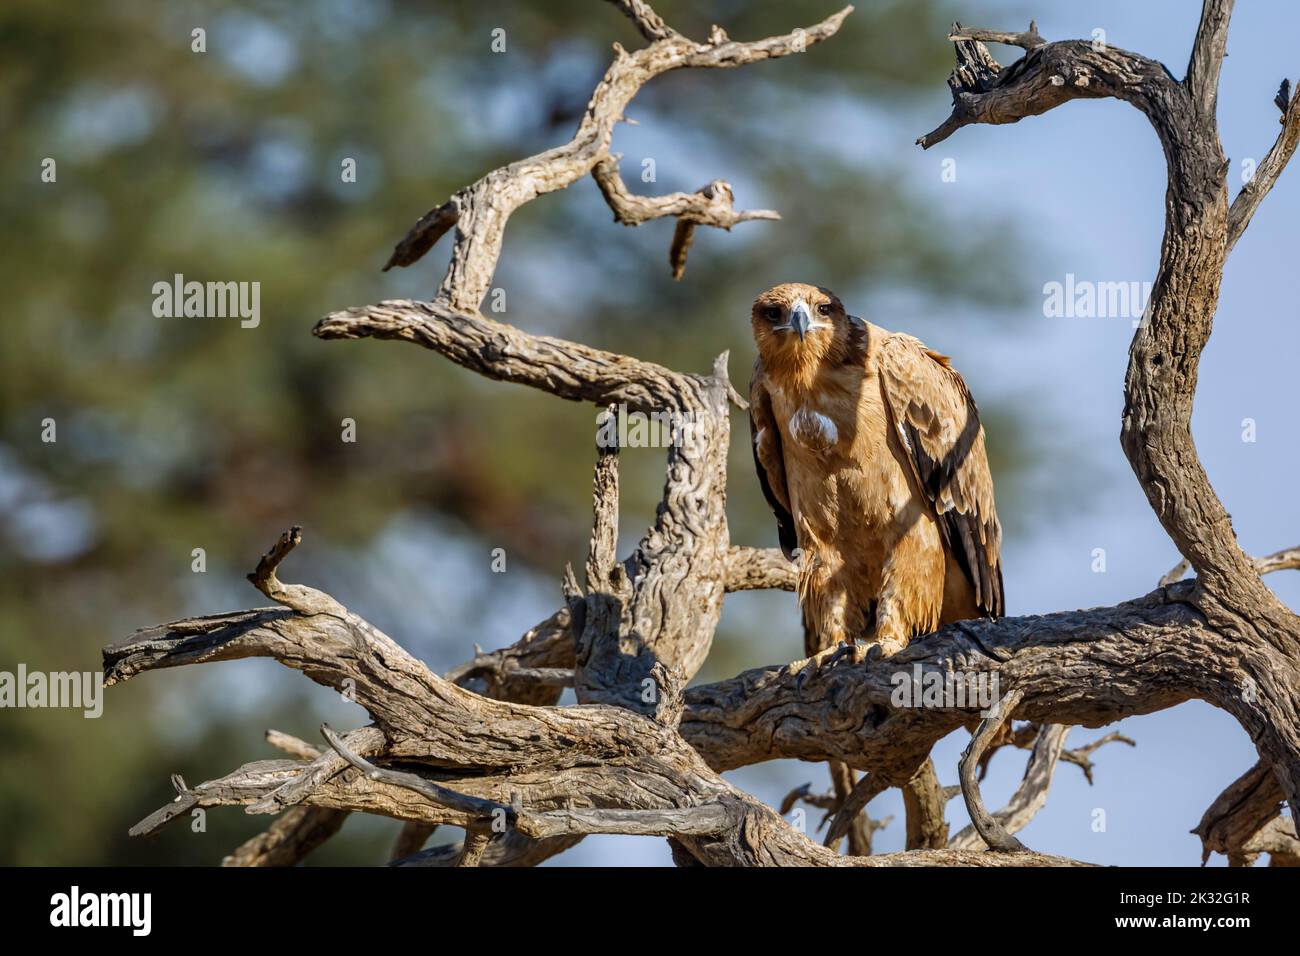 Tawny Eagle standing front view on a log in Kgalagadi transfrontier park, South Africa ; Specie Aquila rapax family of Accipitridae Stock Photo